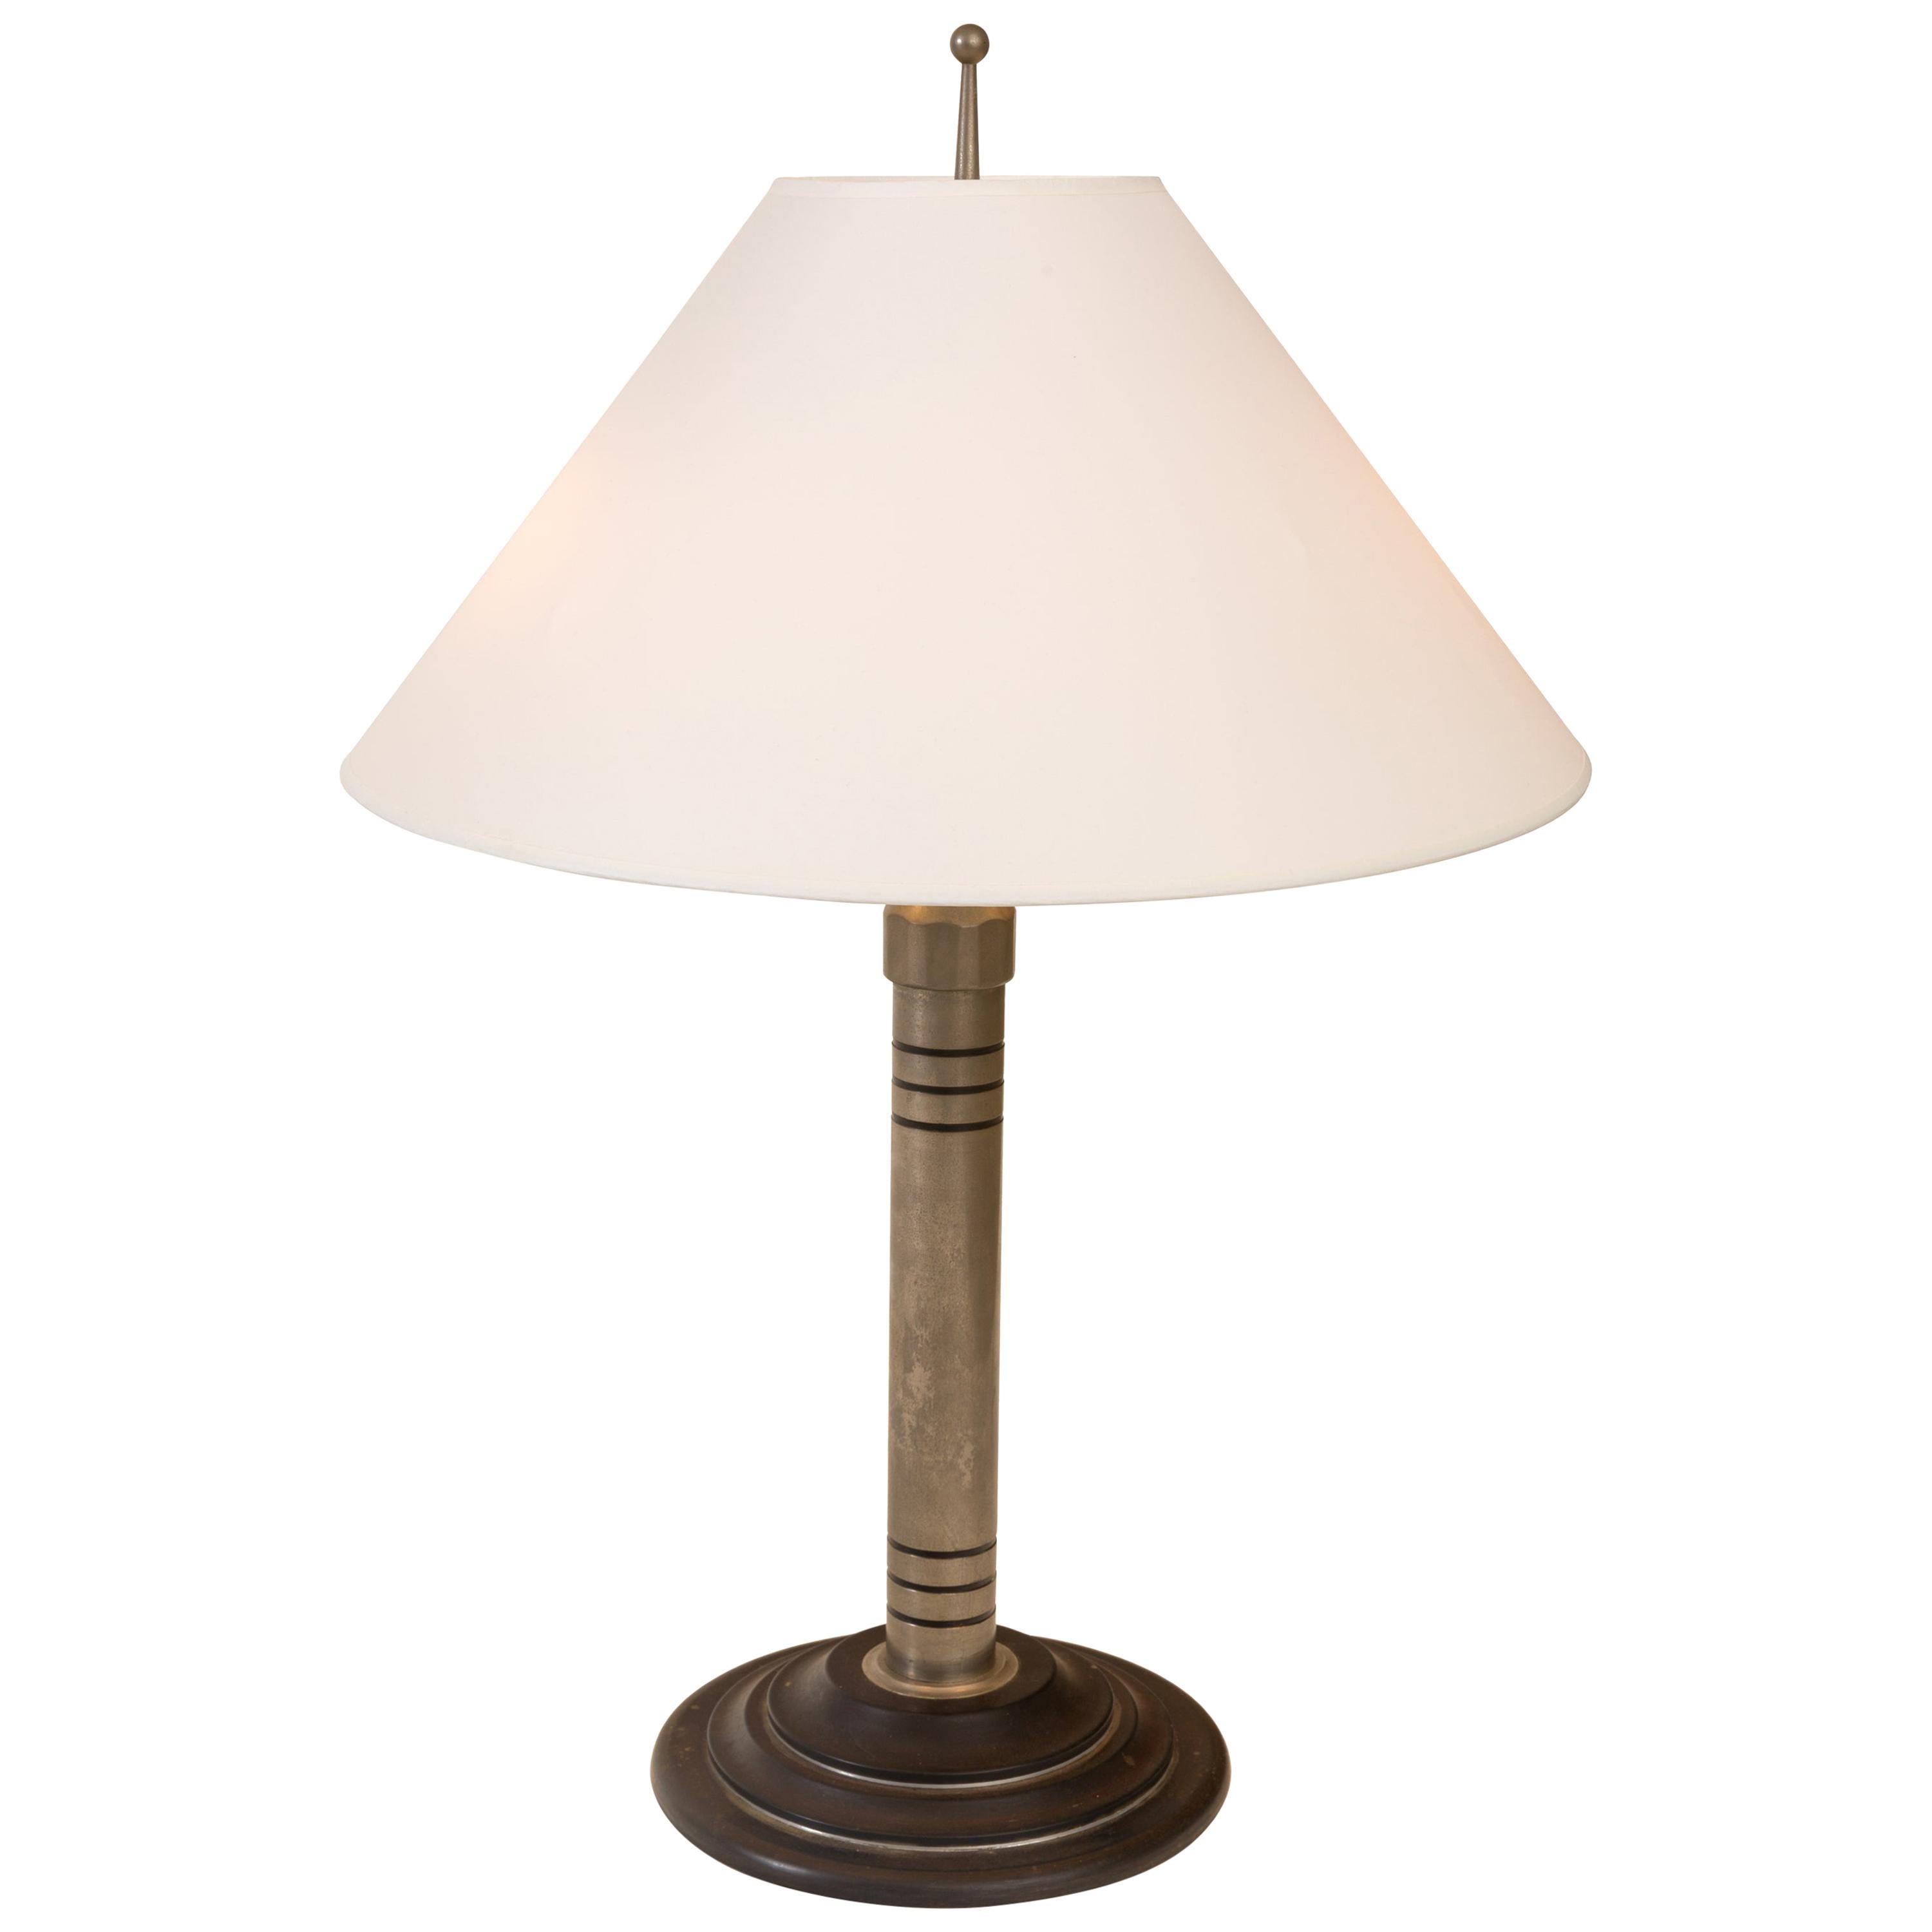 Machine Age Table Lamp, USA 1930s For Sale at 1stDibs